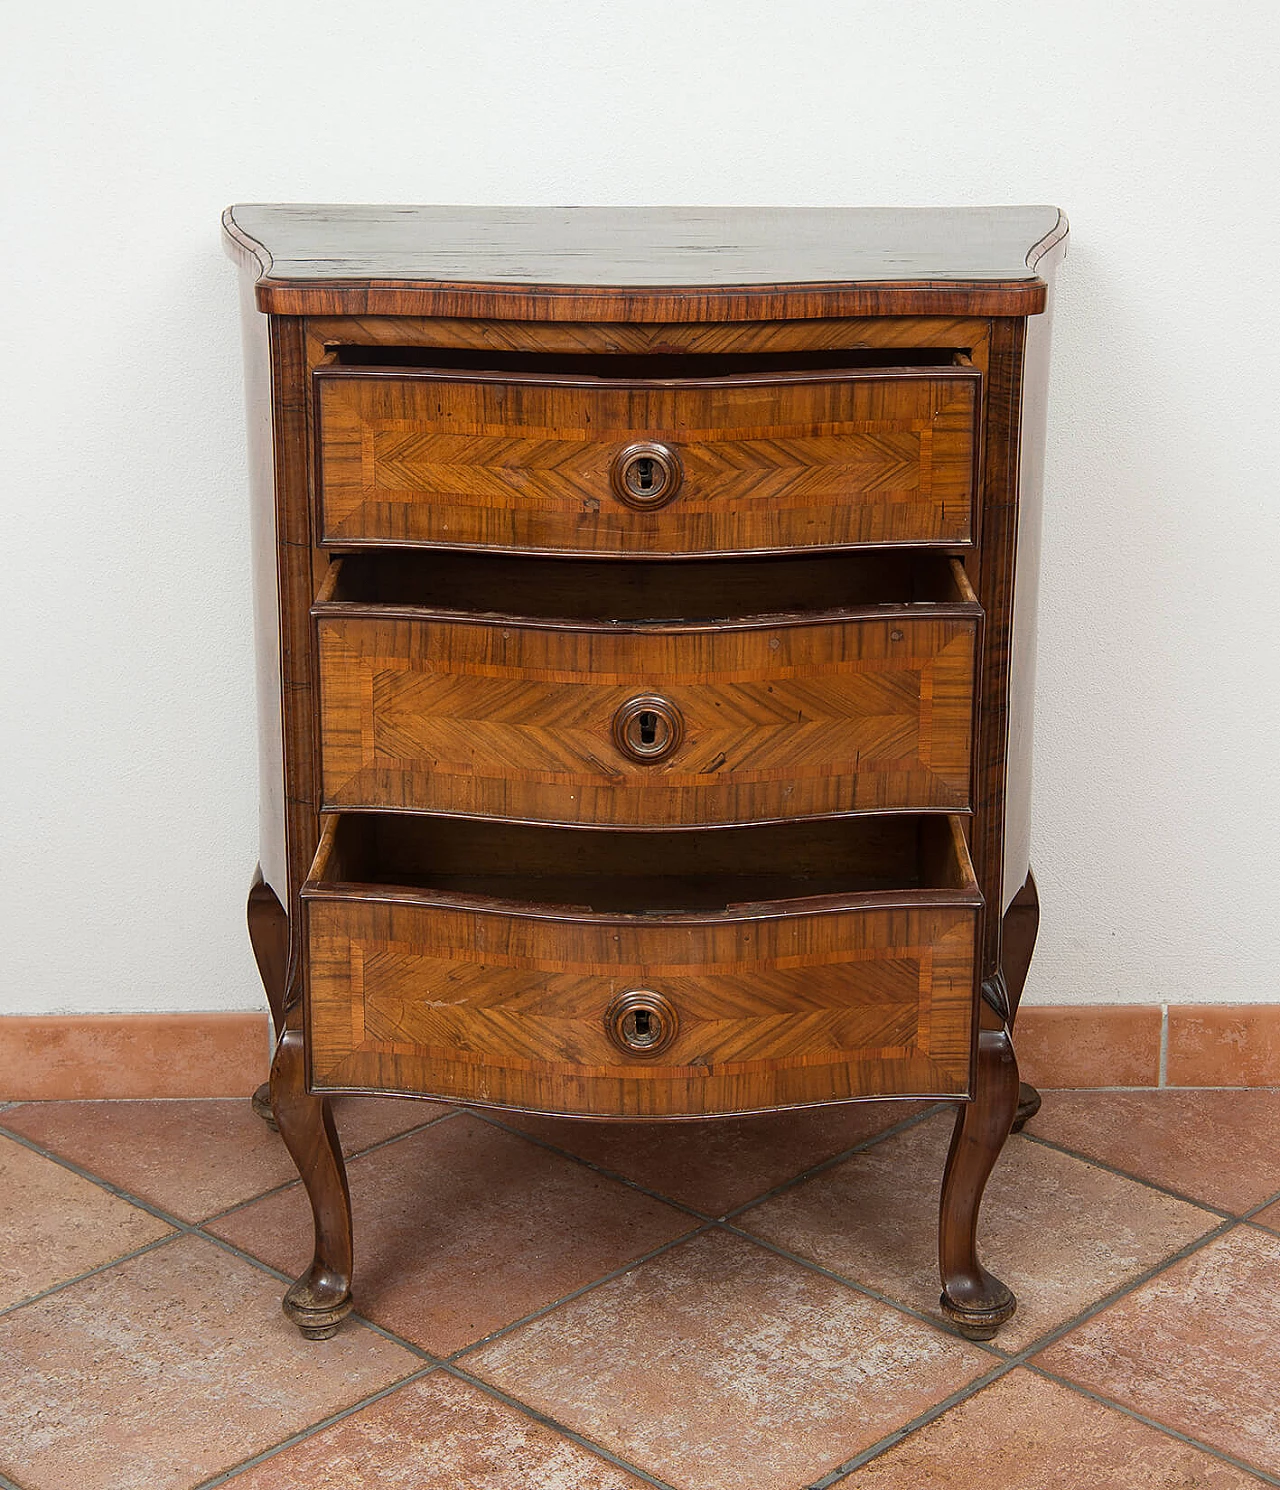 Neapolitan Louis XIV walnut-root bedside table with inlays, 18th century 3